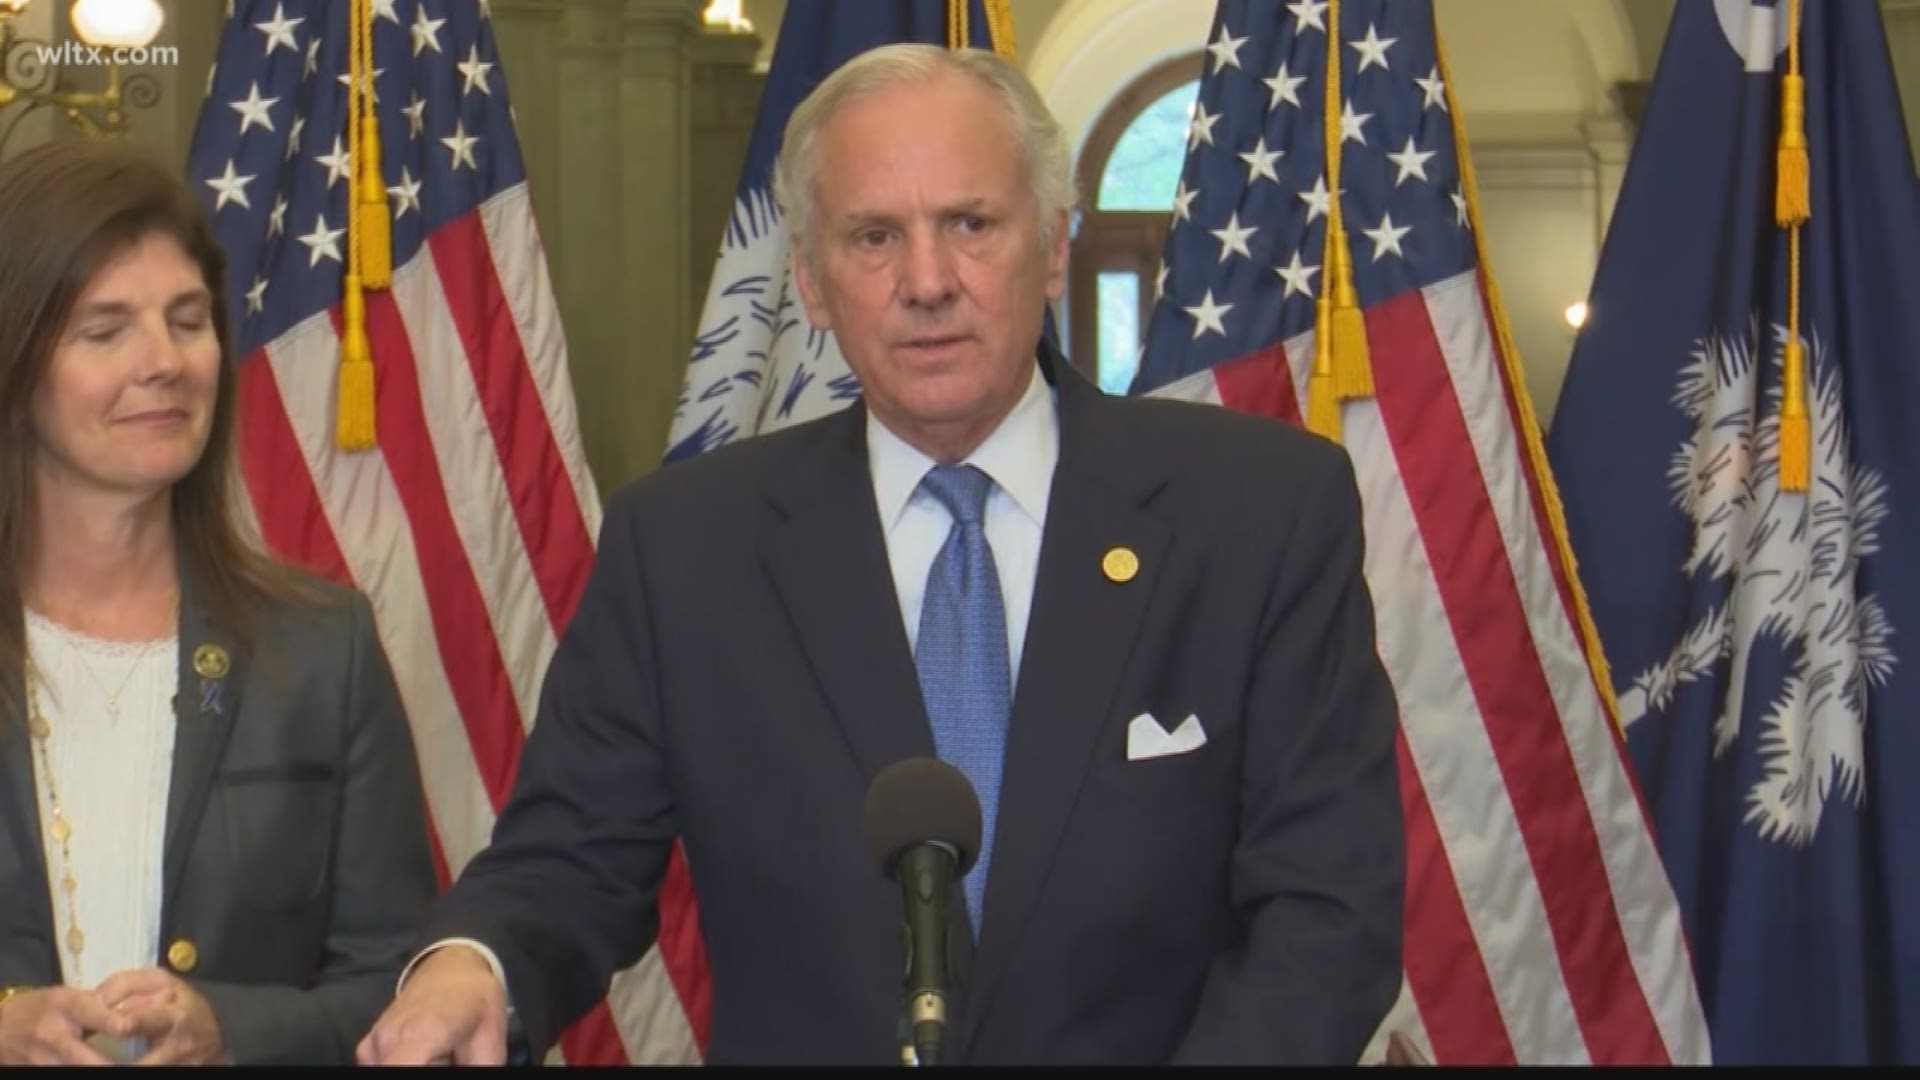 Gov. Henry McMaster's spending proposal for South Carolina includes a 5 percent increase in pay for teachers and a $200 million rebate for taxpayers.